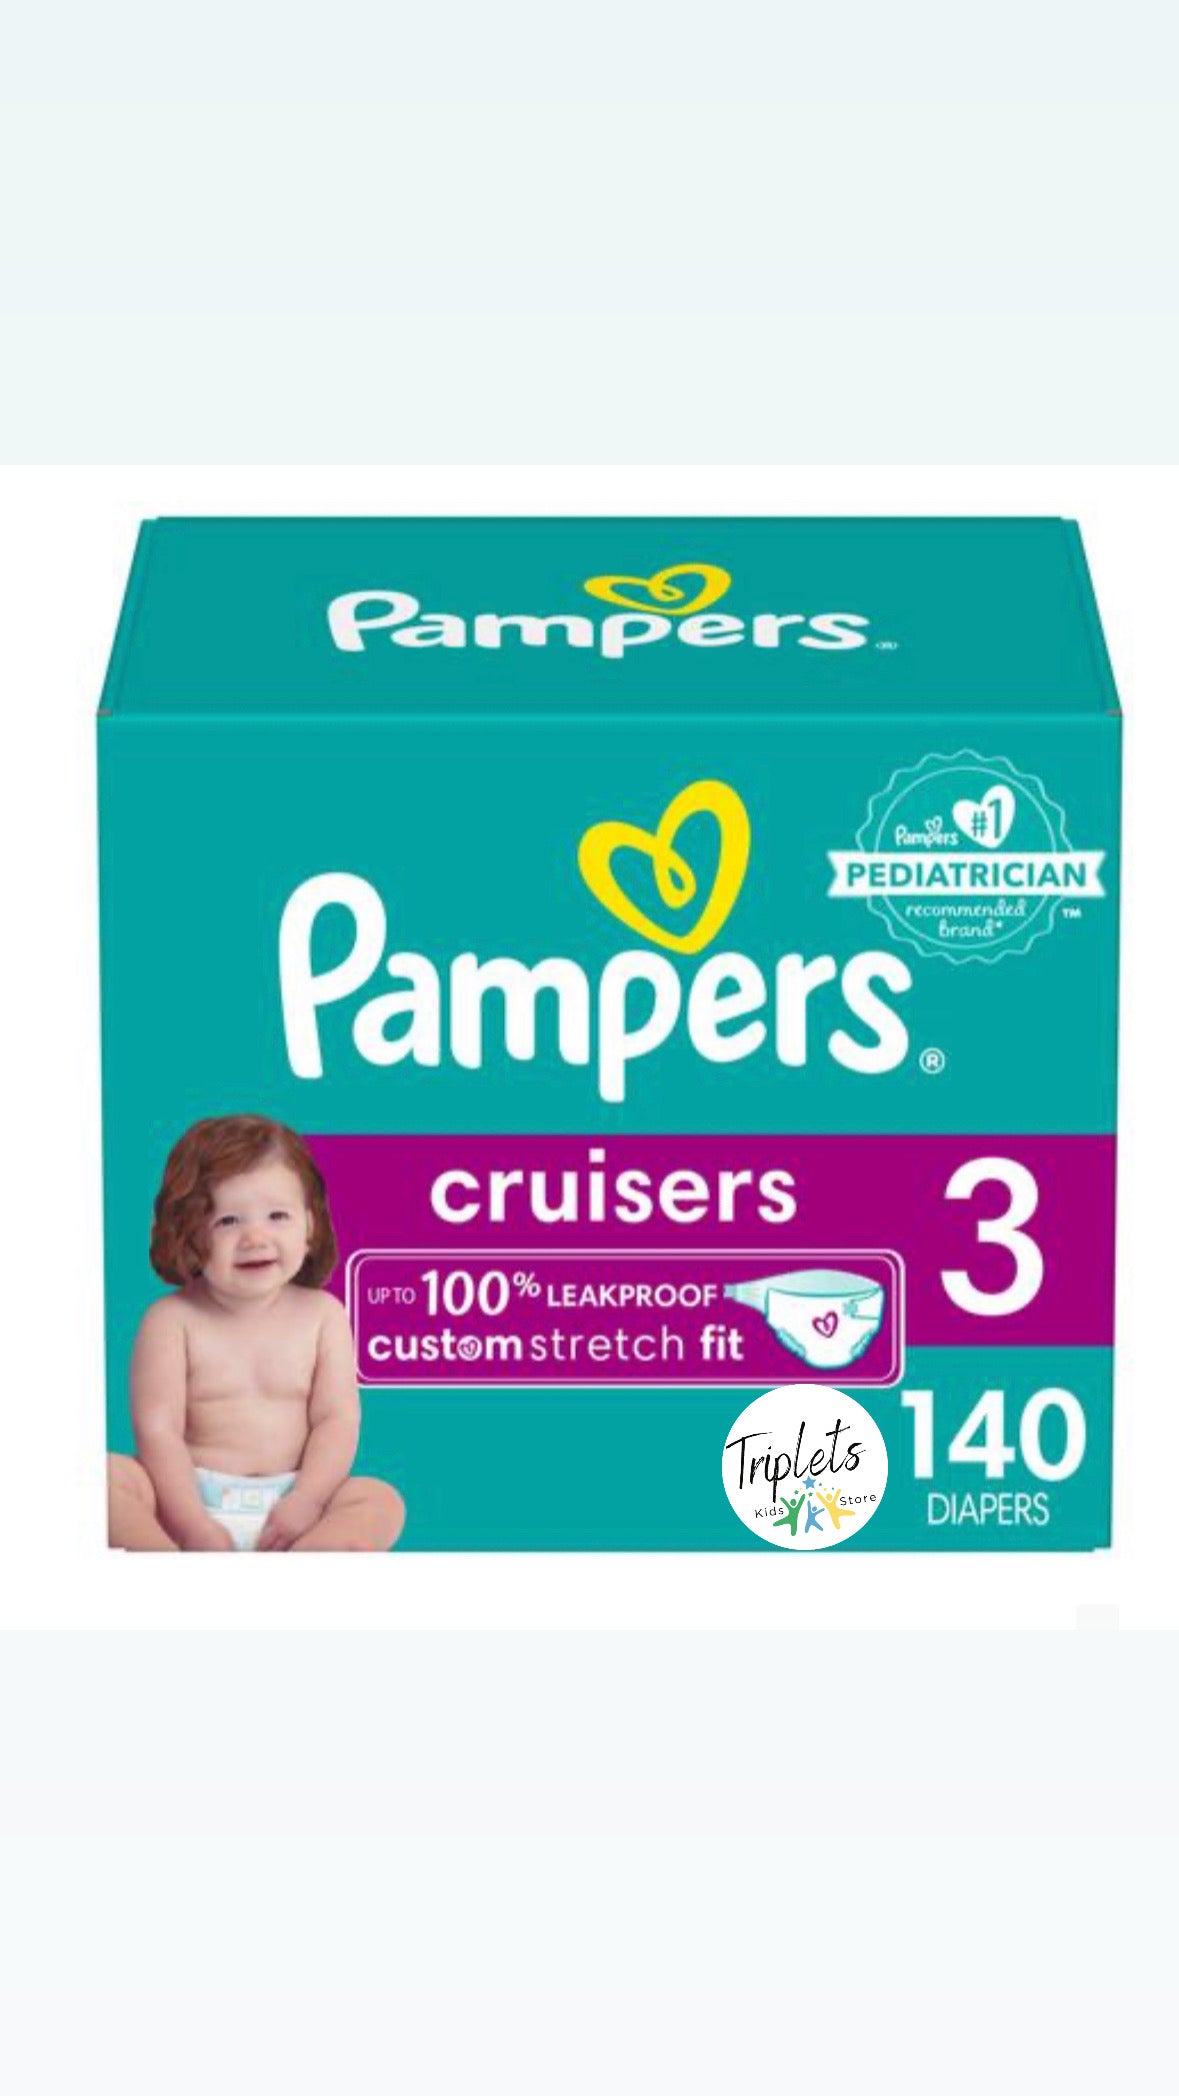 Pampers Pañales Cruisers Size 3